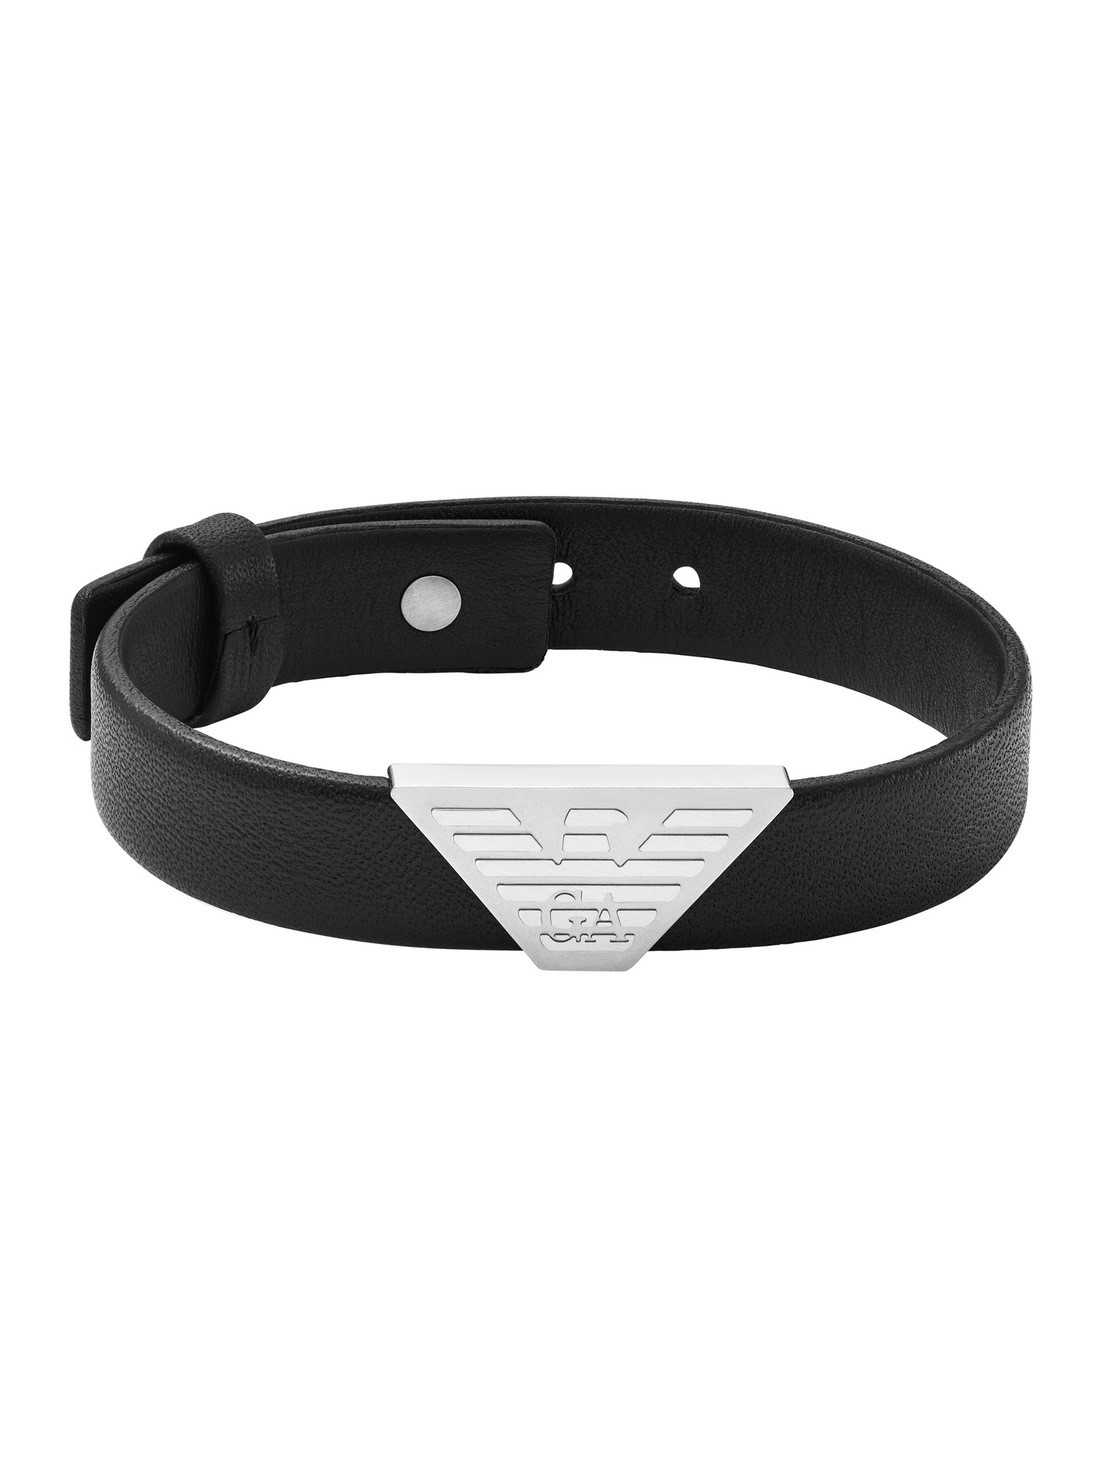 Buy Emporio Armani Mens Bracelet Online at Watch Station India